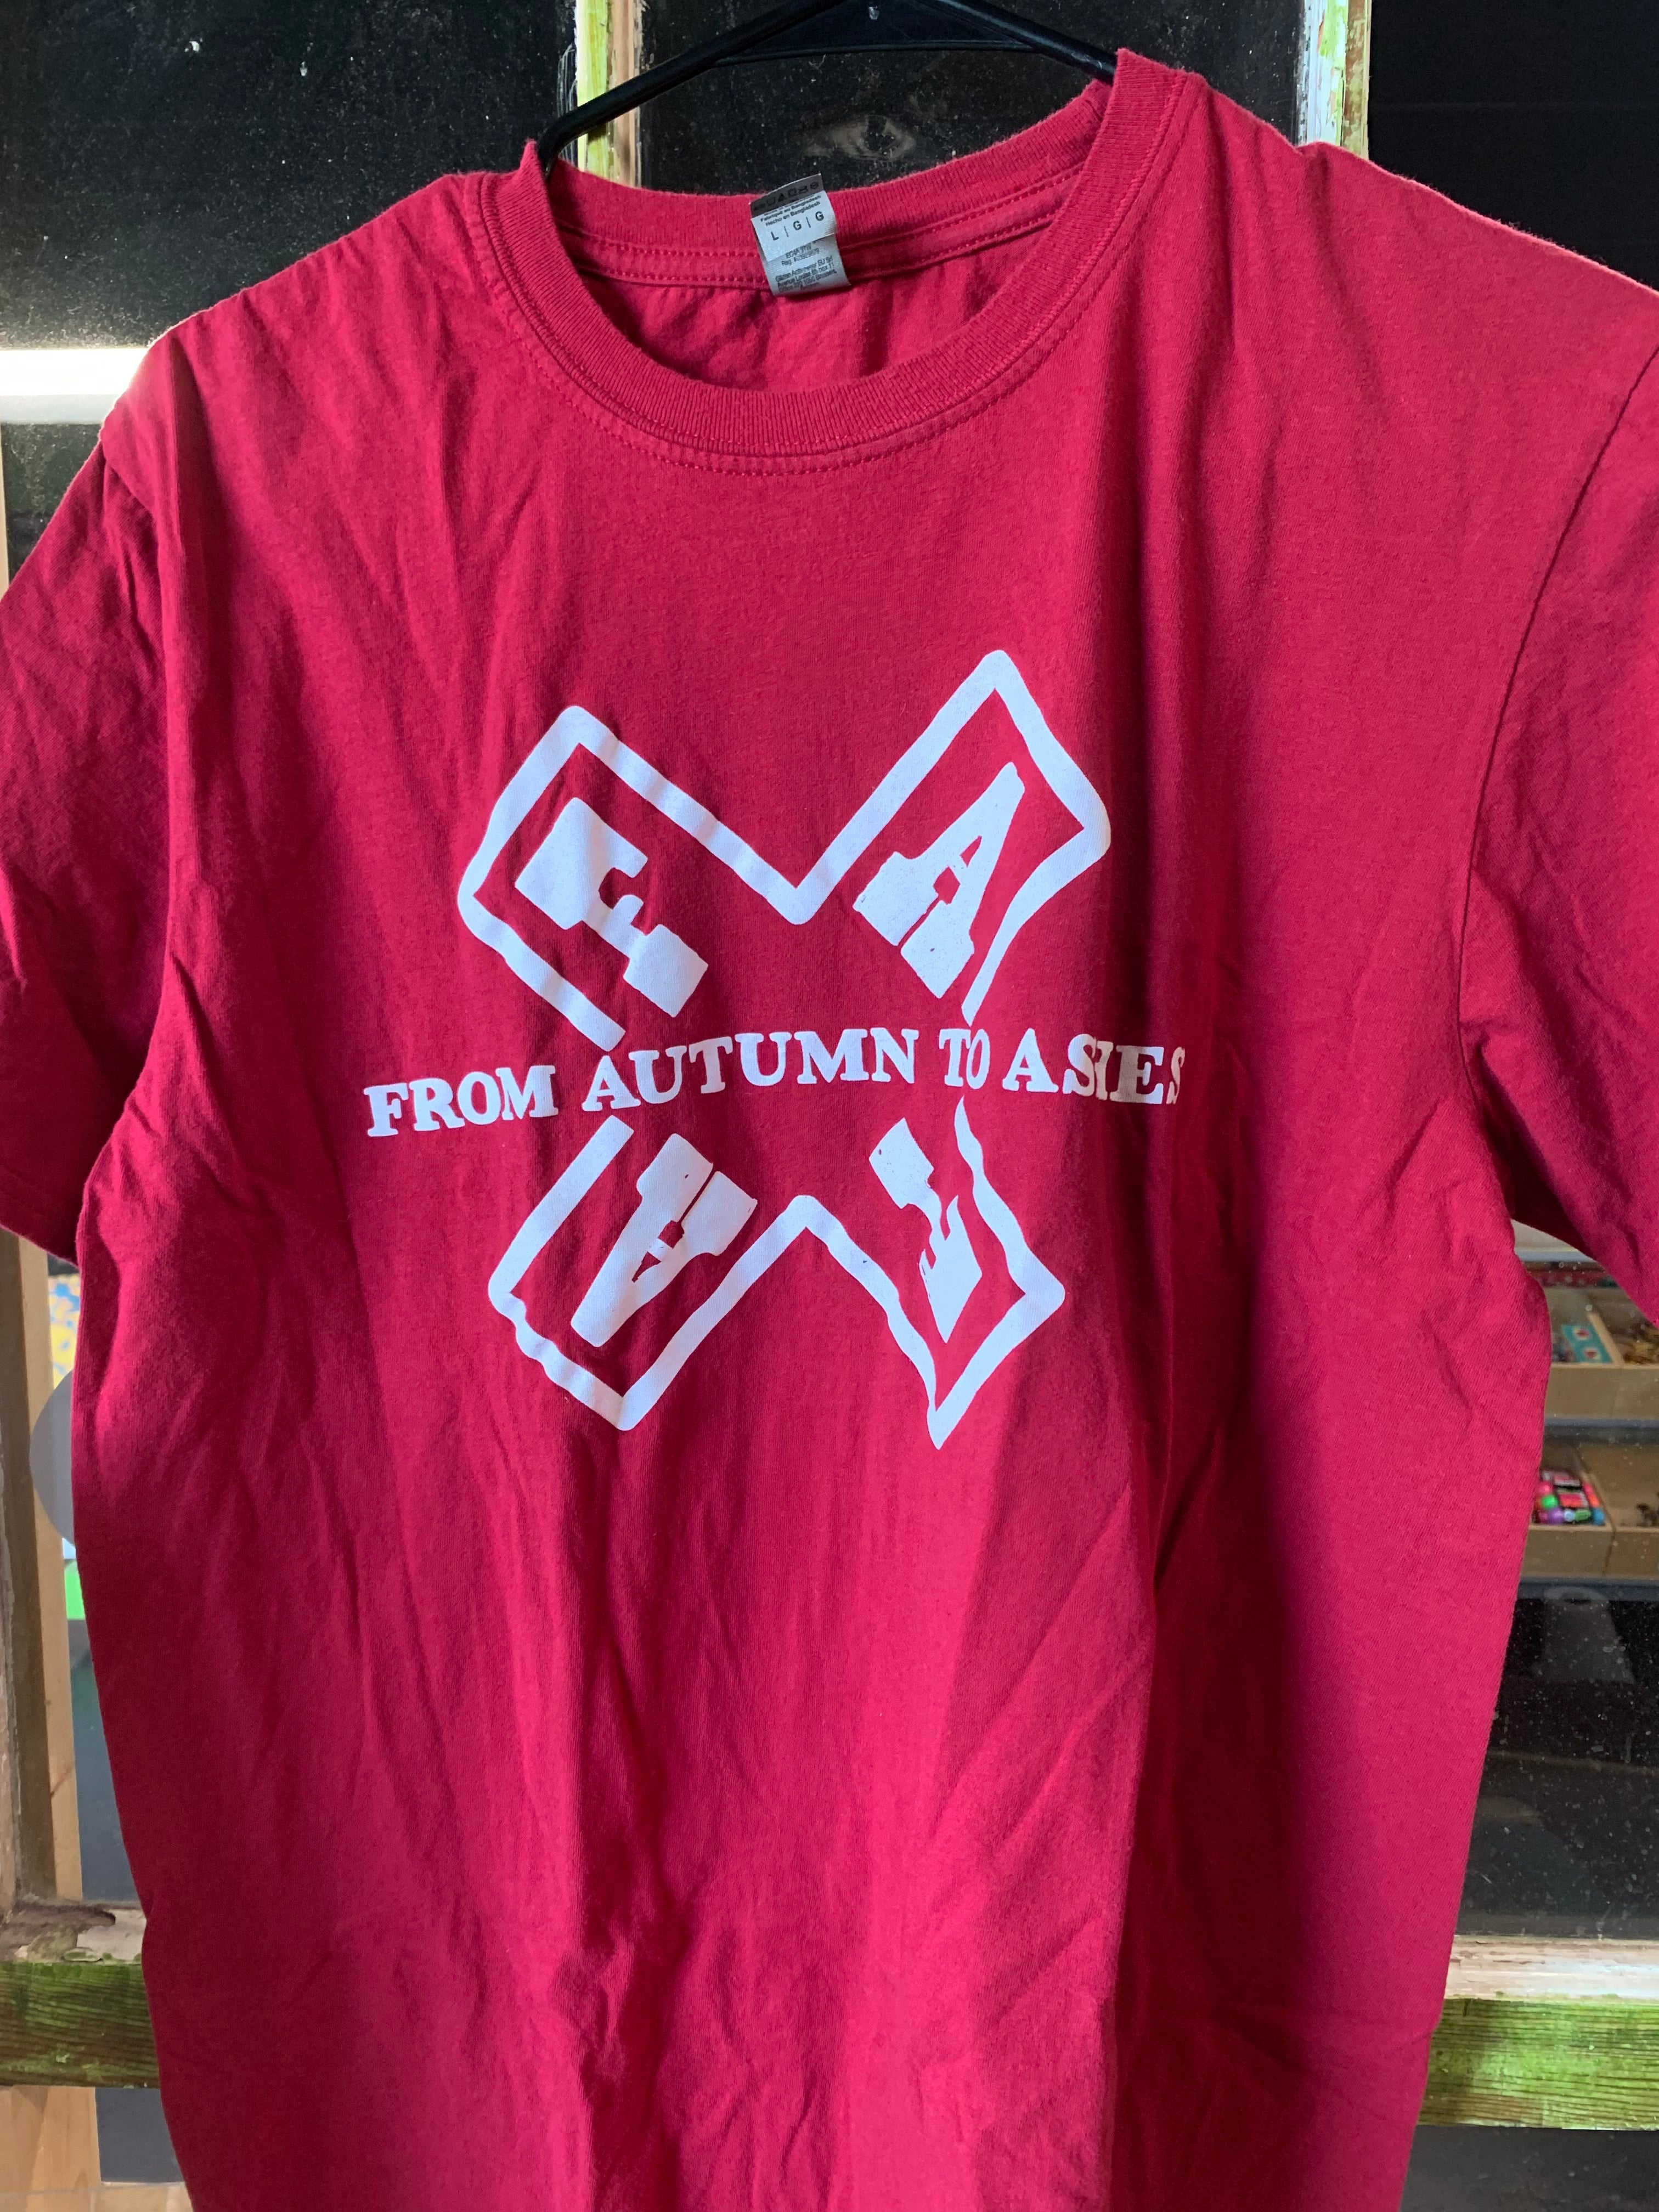 From Autumn To Ashes T-Shirt, Red, L